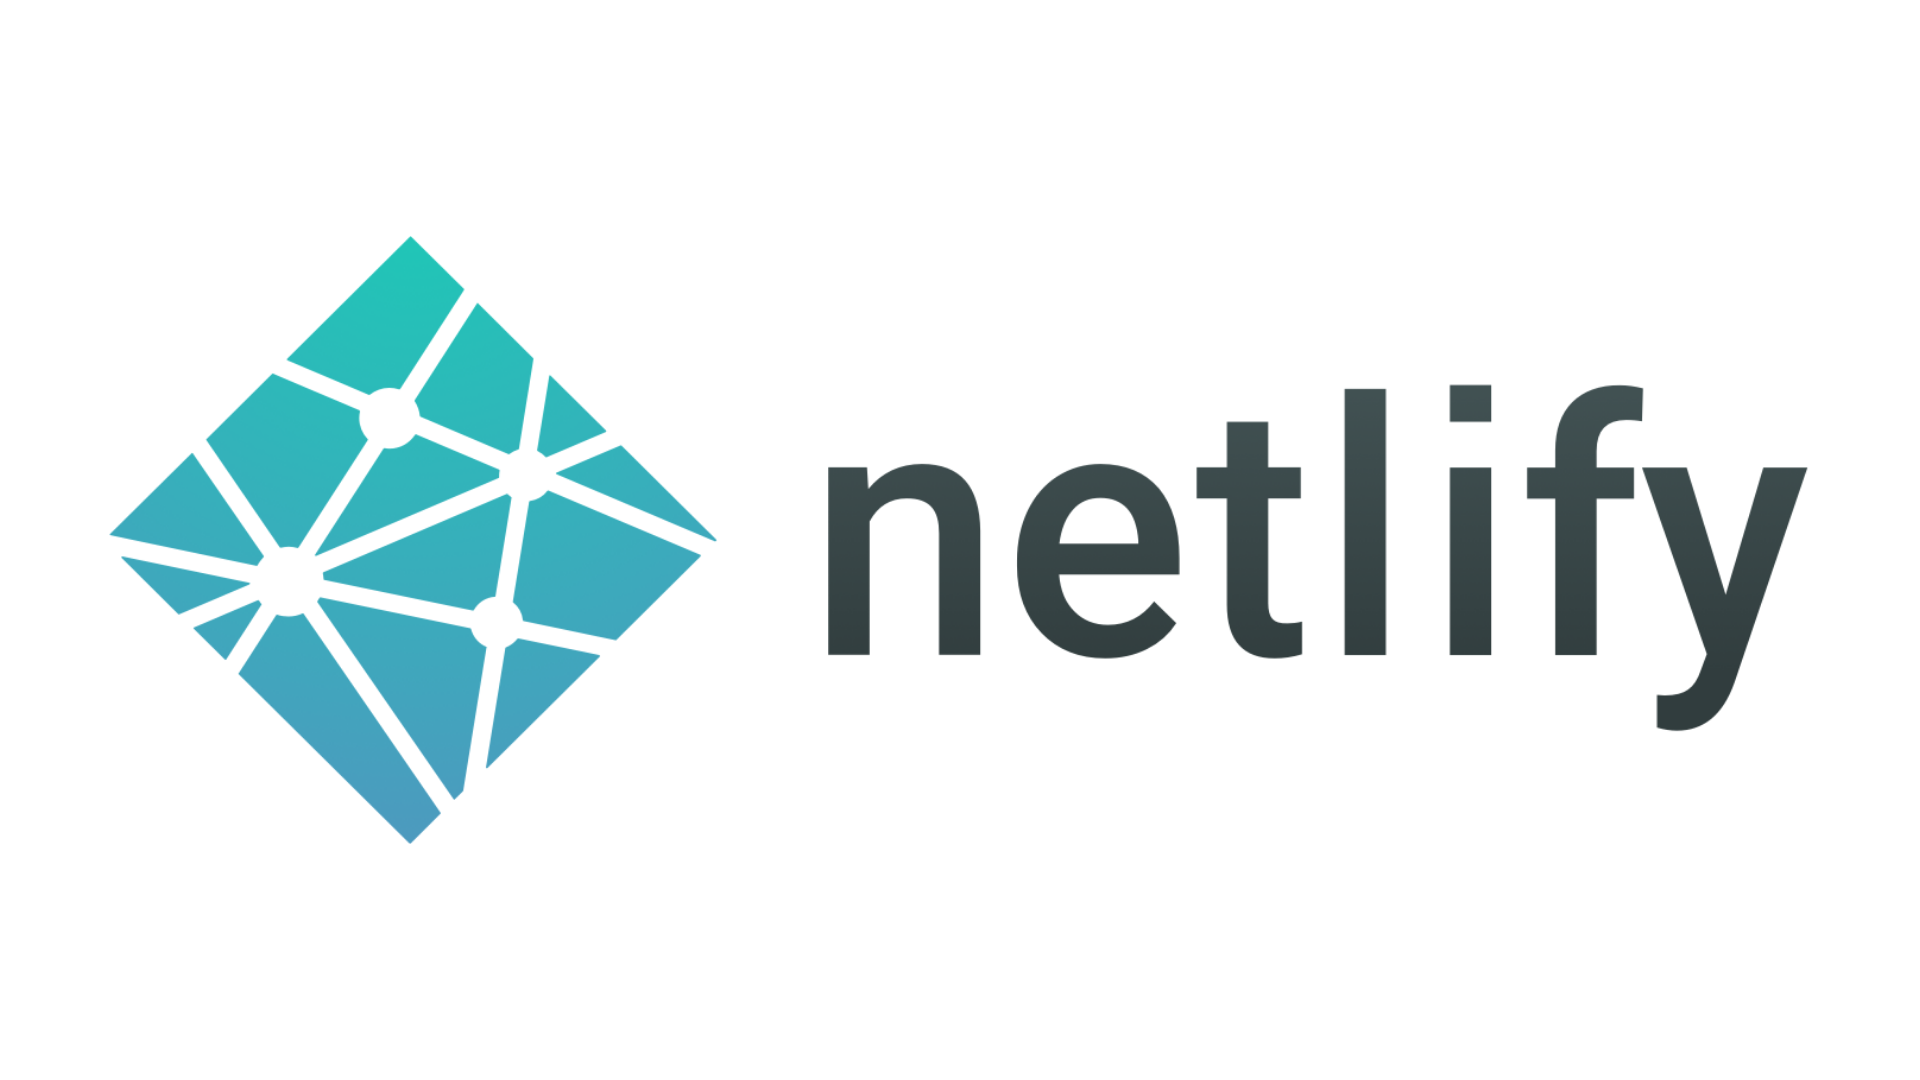 netlify.png